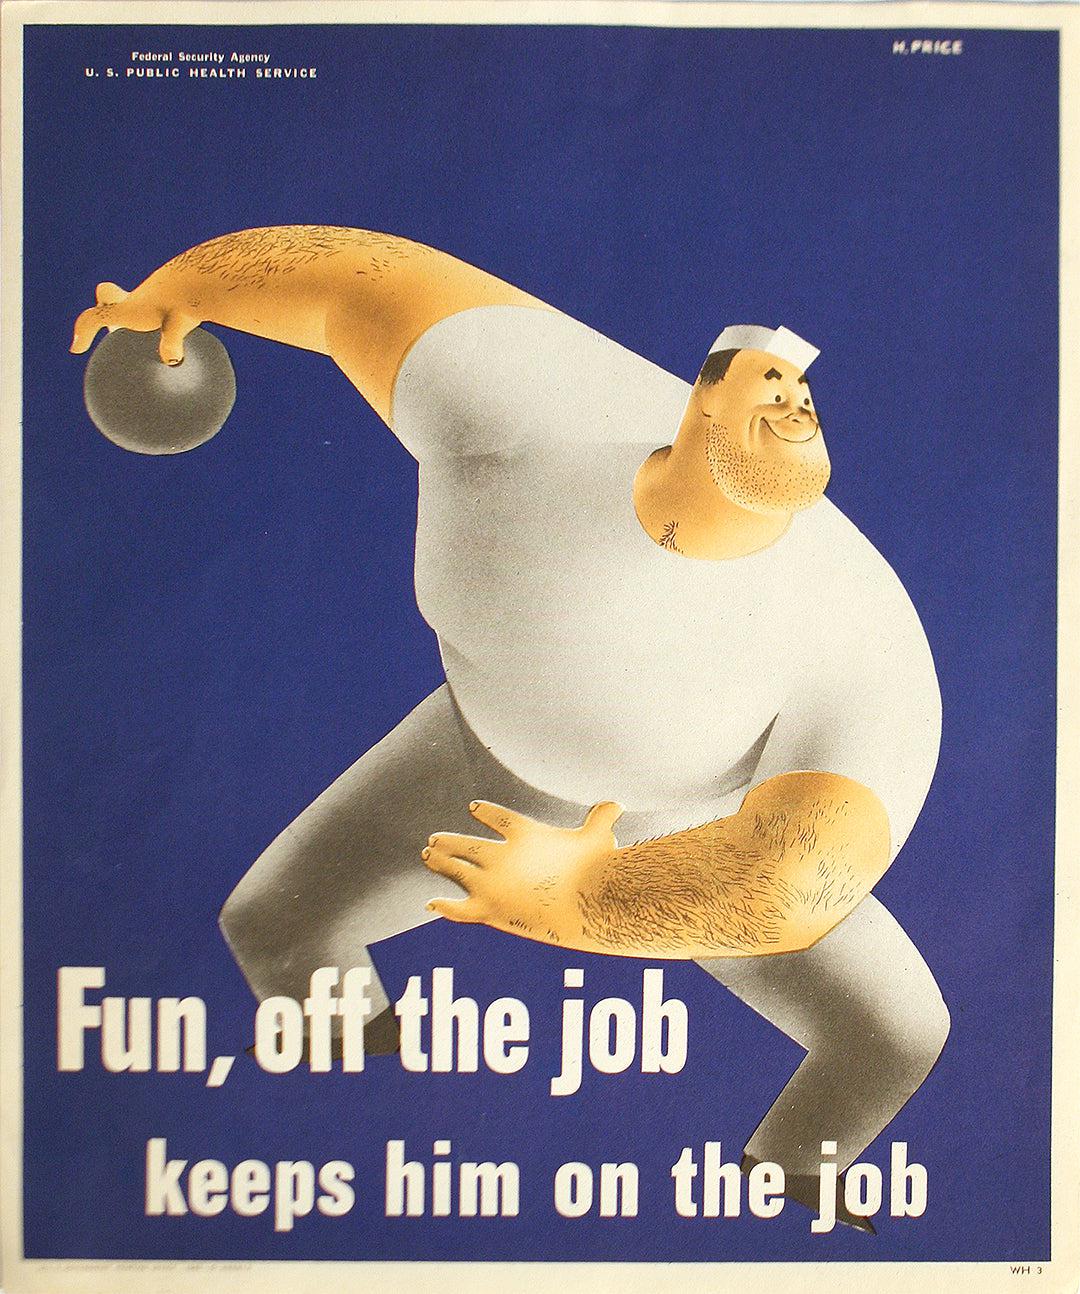 Original Vintage WWII Poster Fun Off the Job Keeps Him on the Job by Price